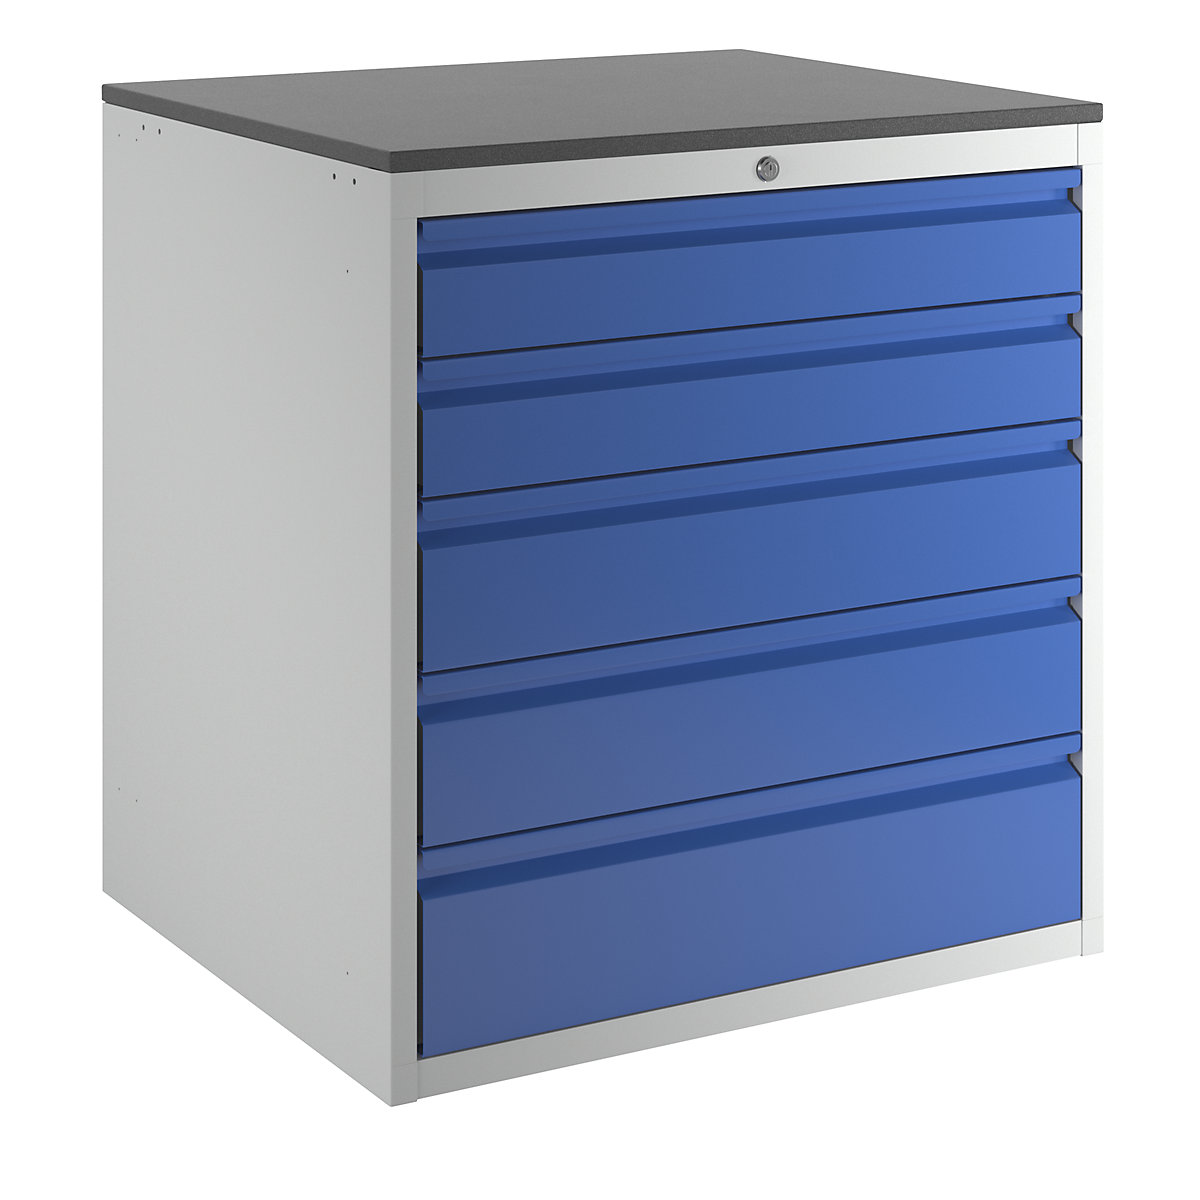 Drawer cupboard with telescopic guides – RAU, height 820 mm, drawers: 2 x 120, 2 x 150, 1 x 180 mm, light grey / gentian blue, width 770 mm-14